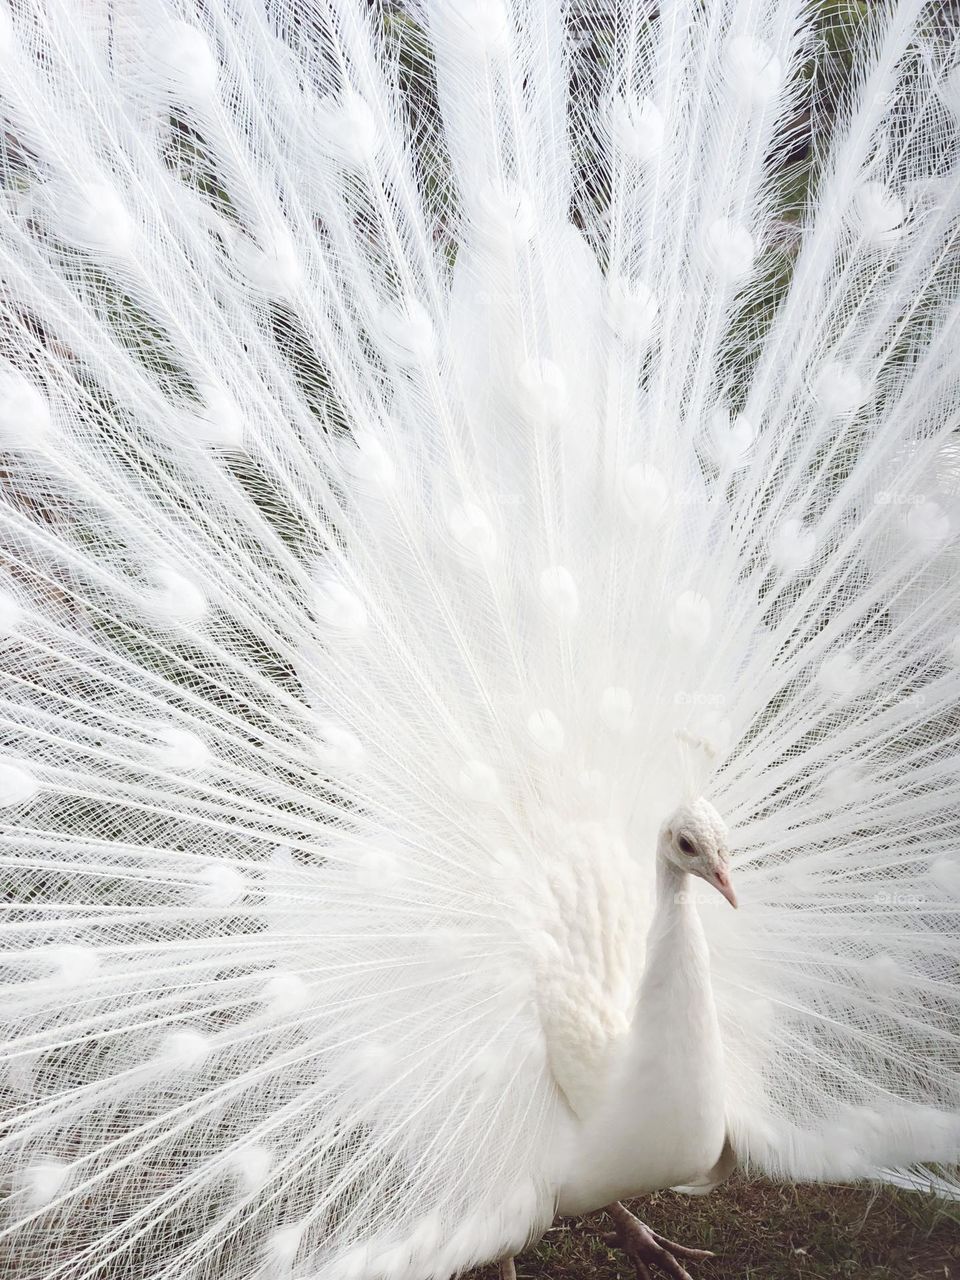 A white peacock with an open tail